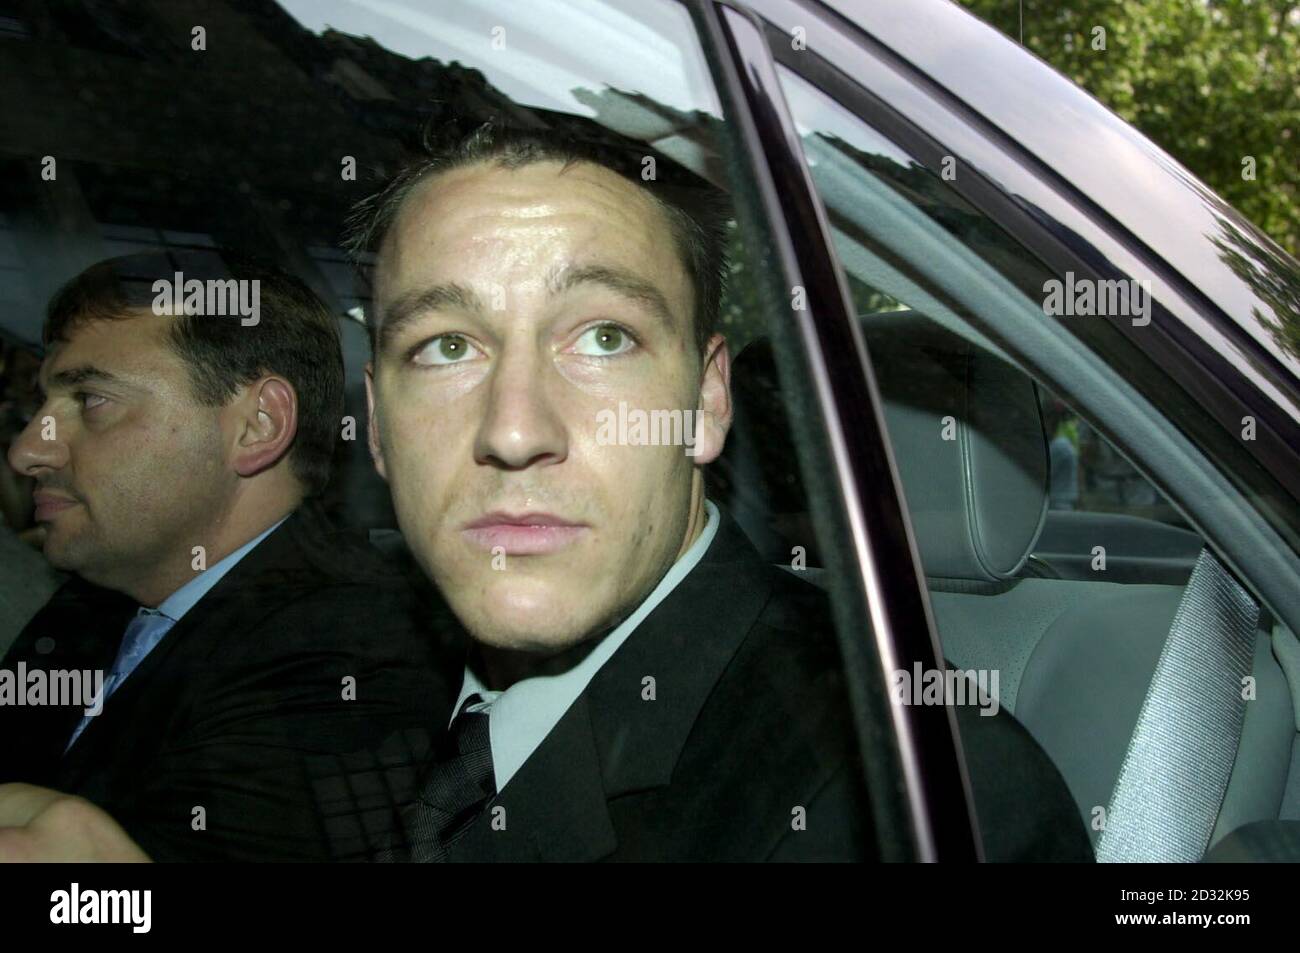 Chelsea footballer John Terry (right) leaving Middlesex Guildhall Crown Court, London on the third day of the trial.    *  Chelsea footballer John Terry, 21, along with team-mate Jody Morris, 23 and Wimbledon defender Des Byrne, 21 were arrested over an alleged brawl at a fashionable night club in Knightsbridge, central London. Doorman for The Wellington Club in Knightsbridge, Trevor Thirlwall, 28, claims his left eye exploded in blood when Terry hit him with a bottle after he ejected the three footballers from the club for loutish behaviour.  Stock Photo